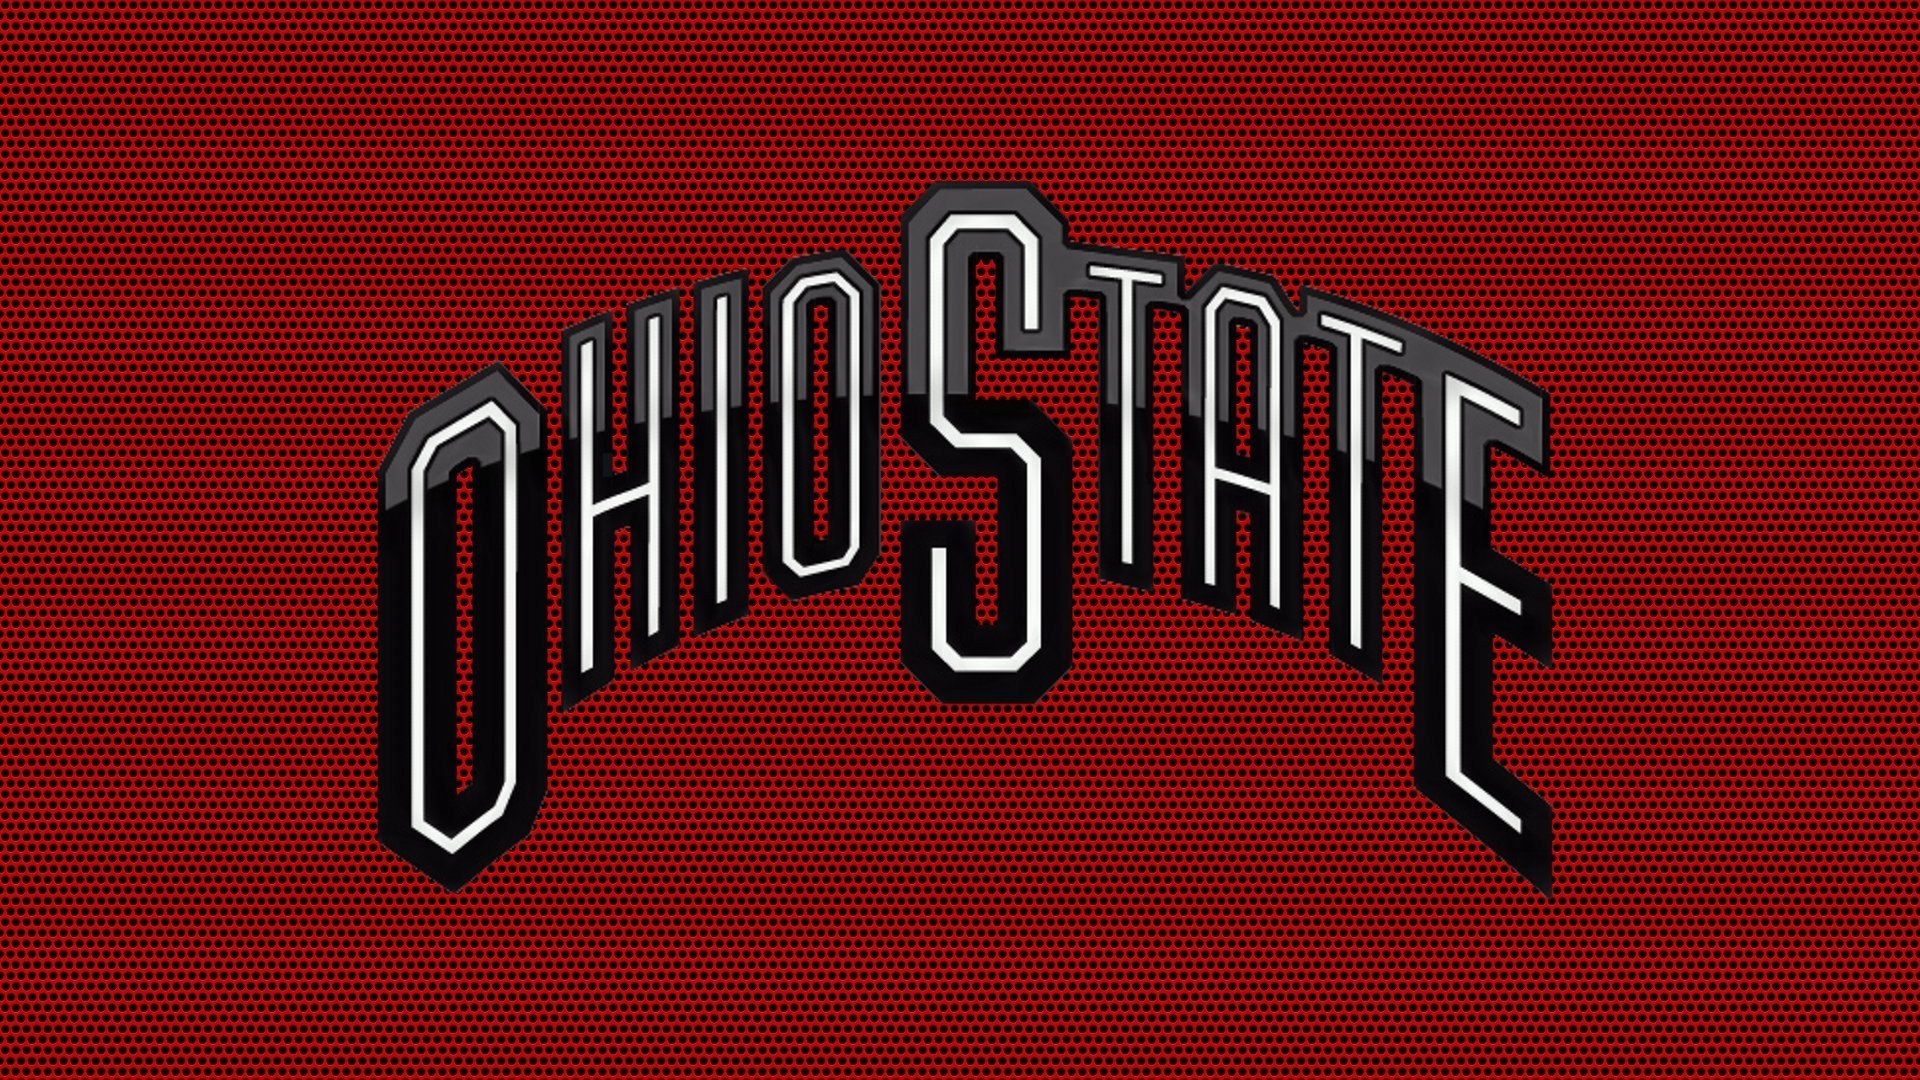 1920x1080 OHIO STATE BUCKEYES college football poster wallpaper background.